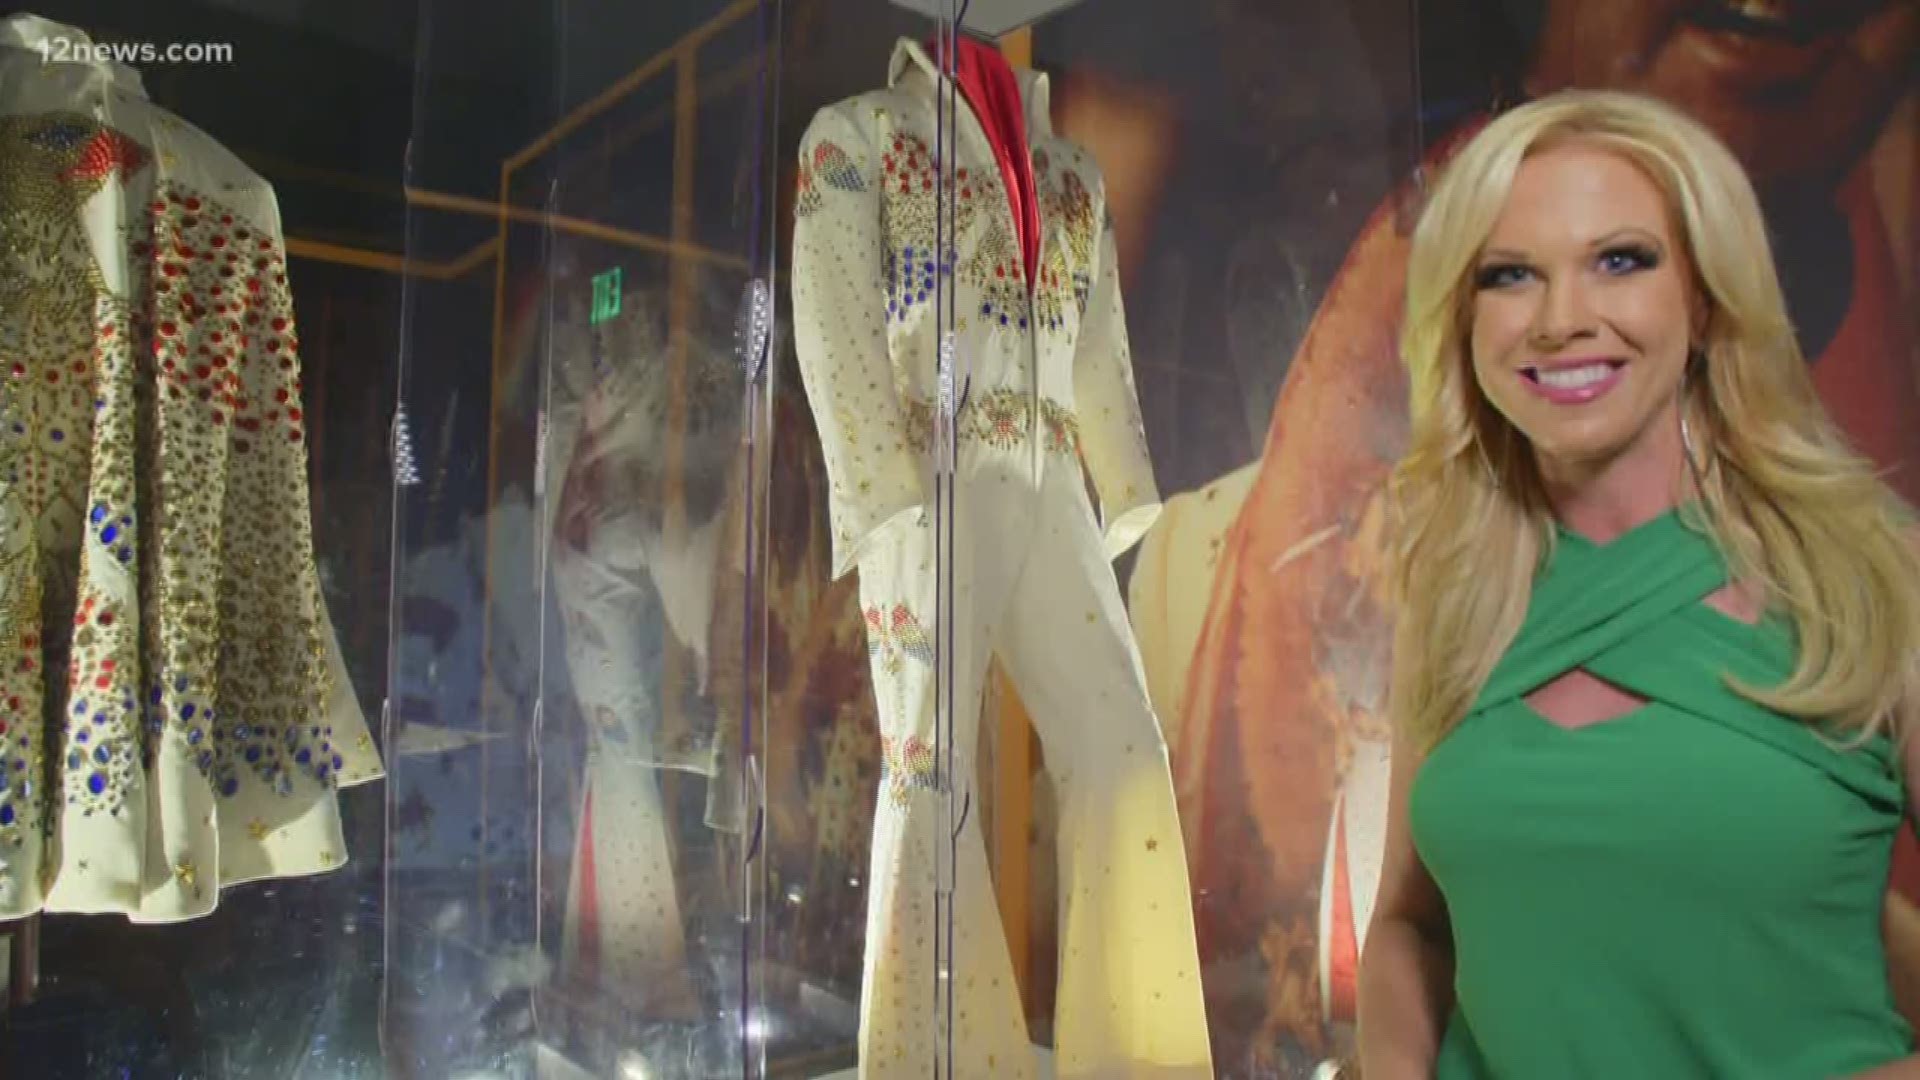 Team 12's Krystle Henderson takes us on a tour of Graceland. Let's see what awesome memorabilia she finds.